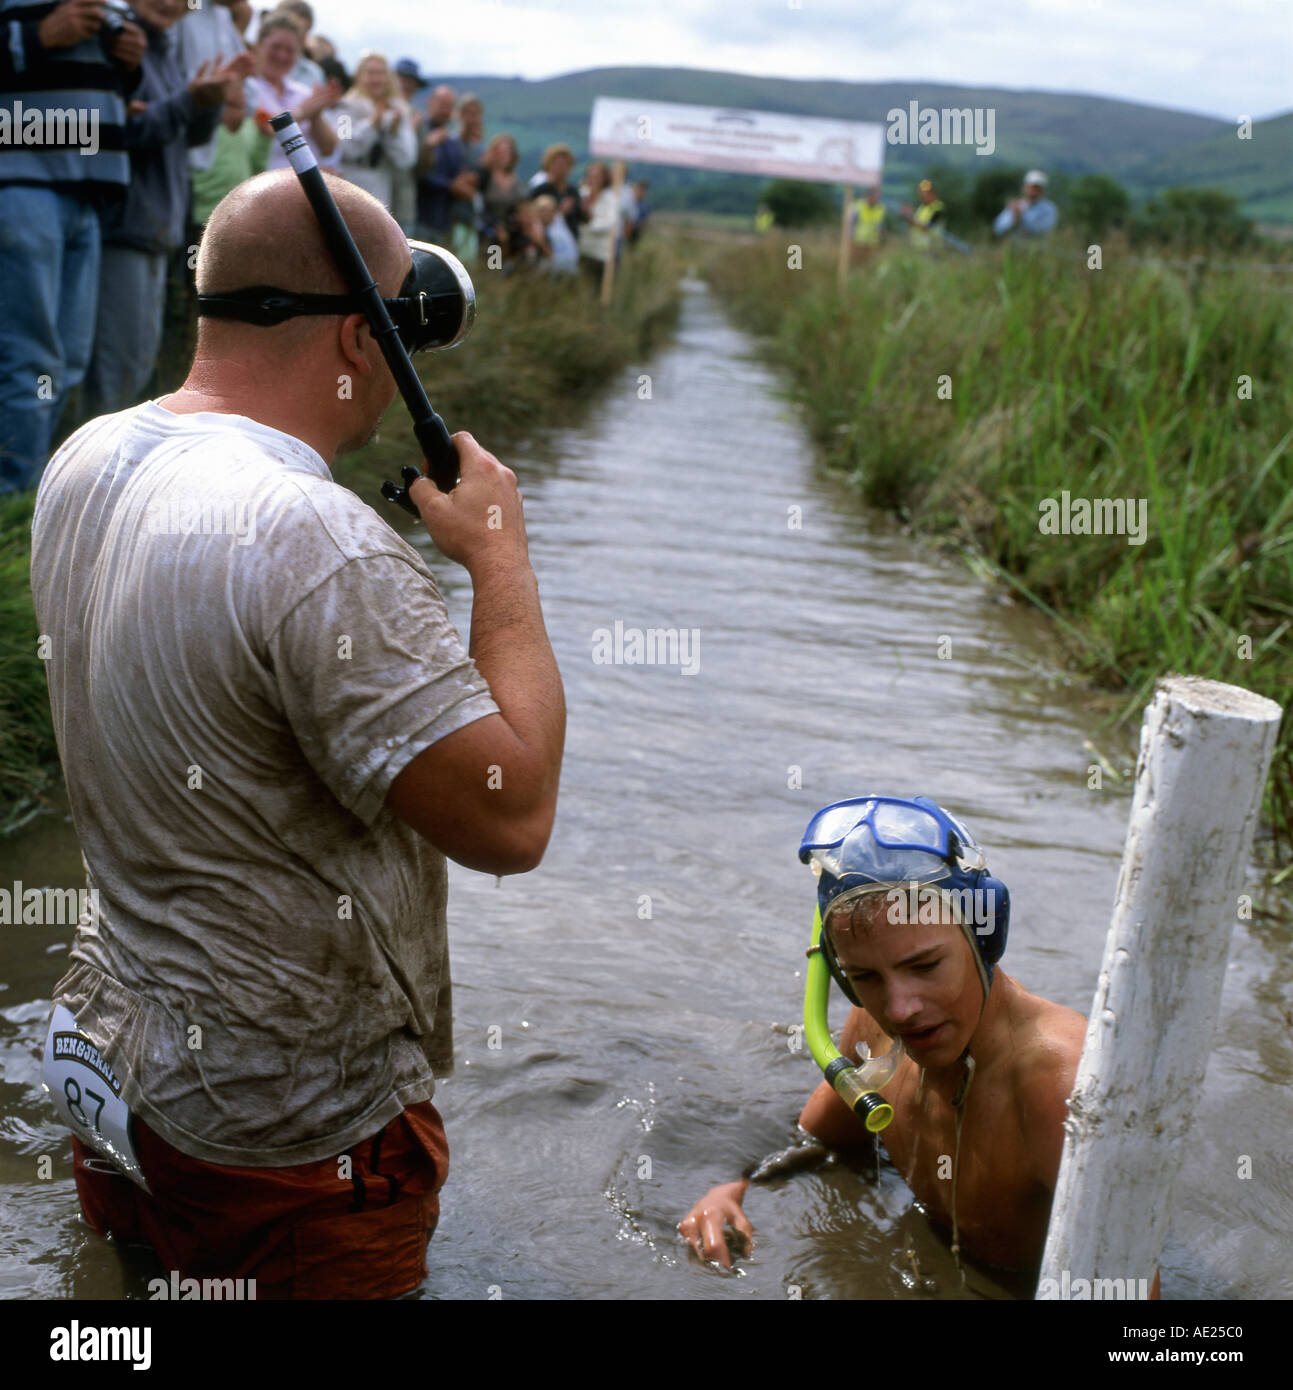 The World Bog Snorkelling ChampionshipS is held annually in a Mid Wales peat bog Llanwrtyd Wells Wales UK   KATHY DEWITT Stock Photo